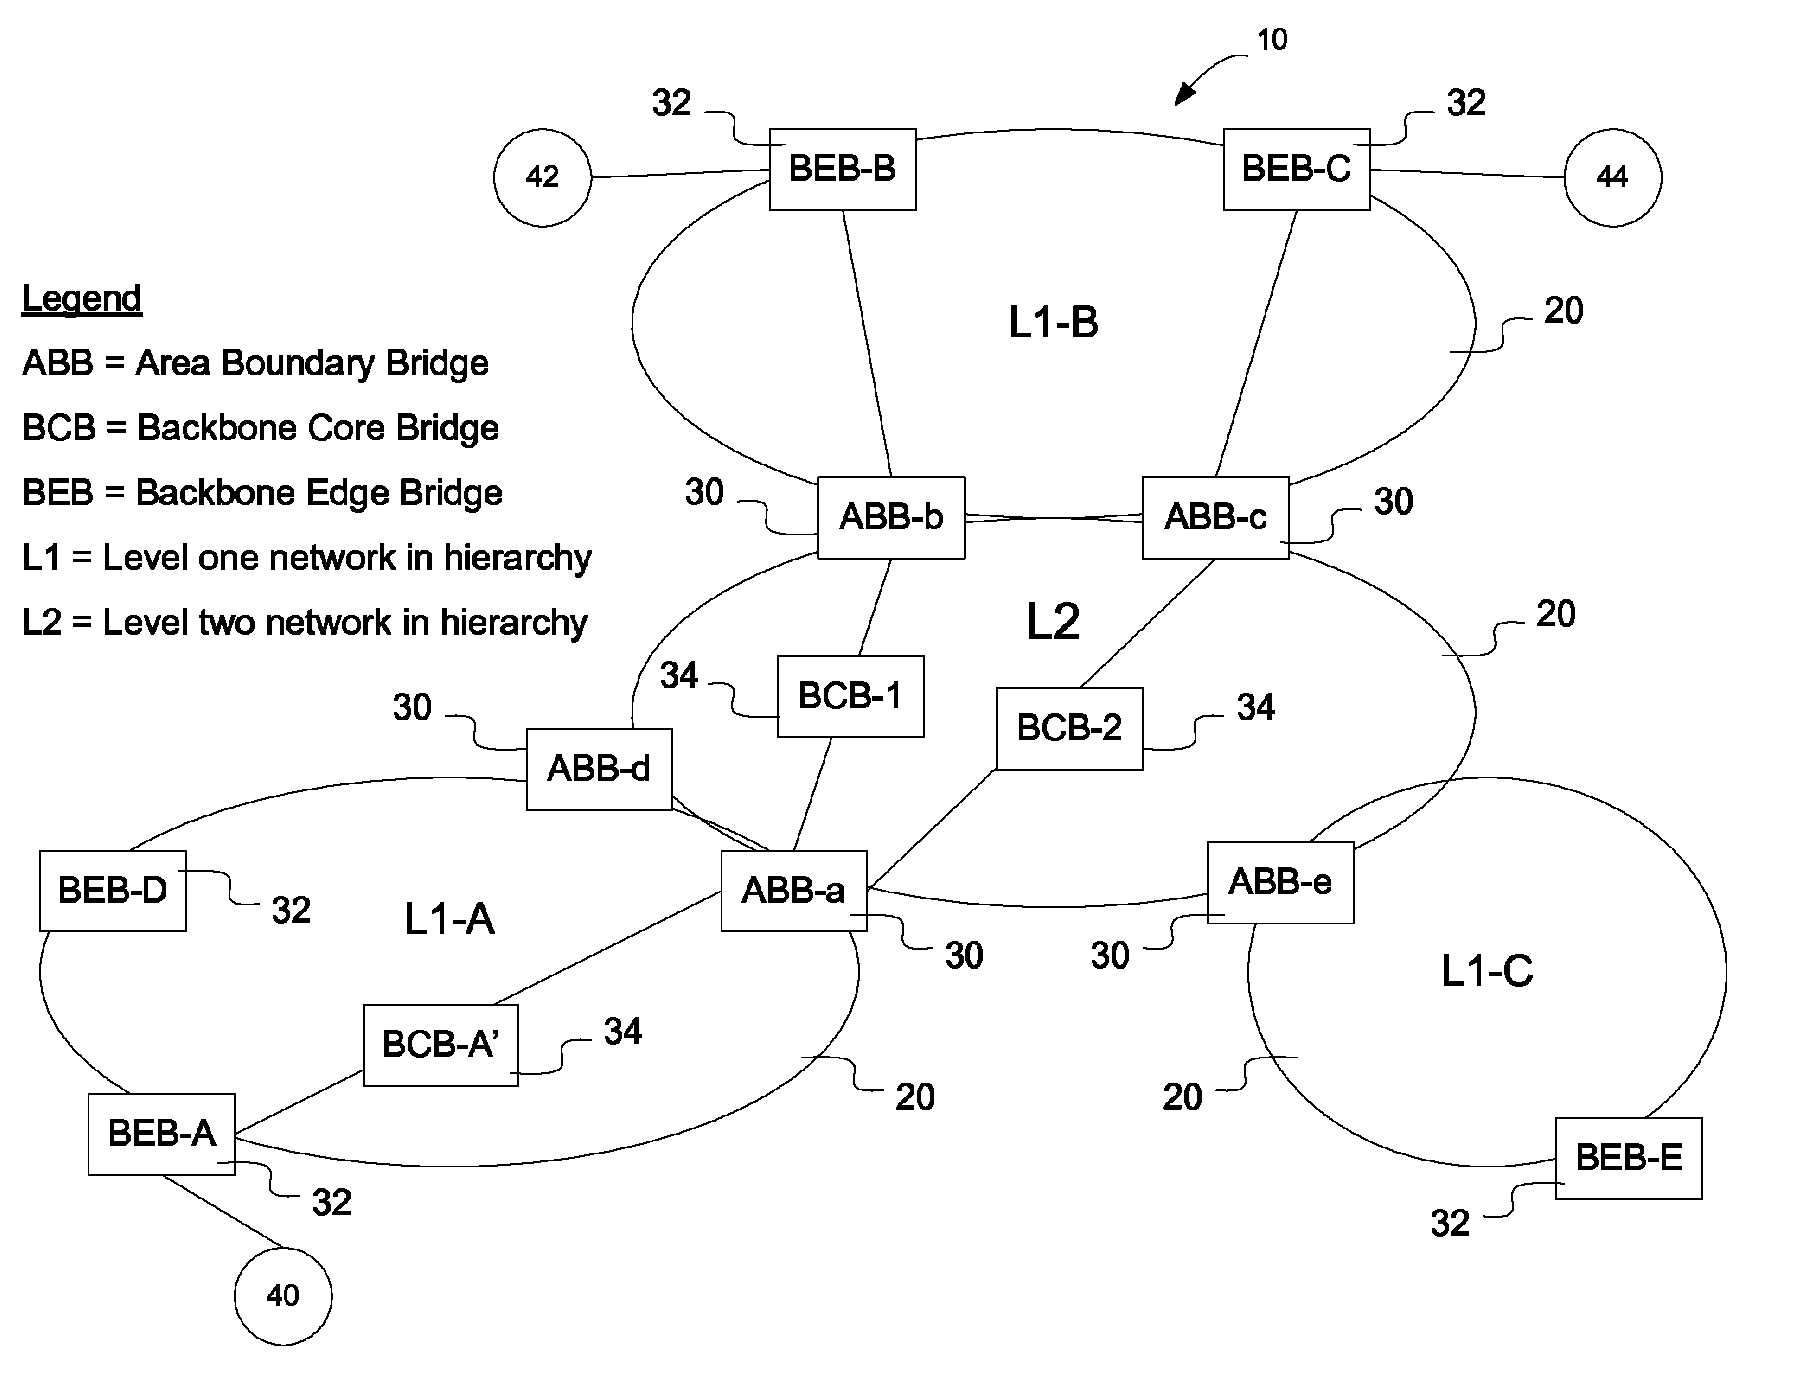 Method and apparatus for exchanging routing information and the establishment of connectivity across multiple network areas